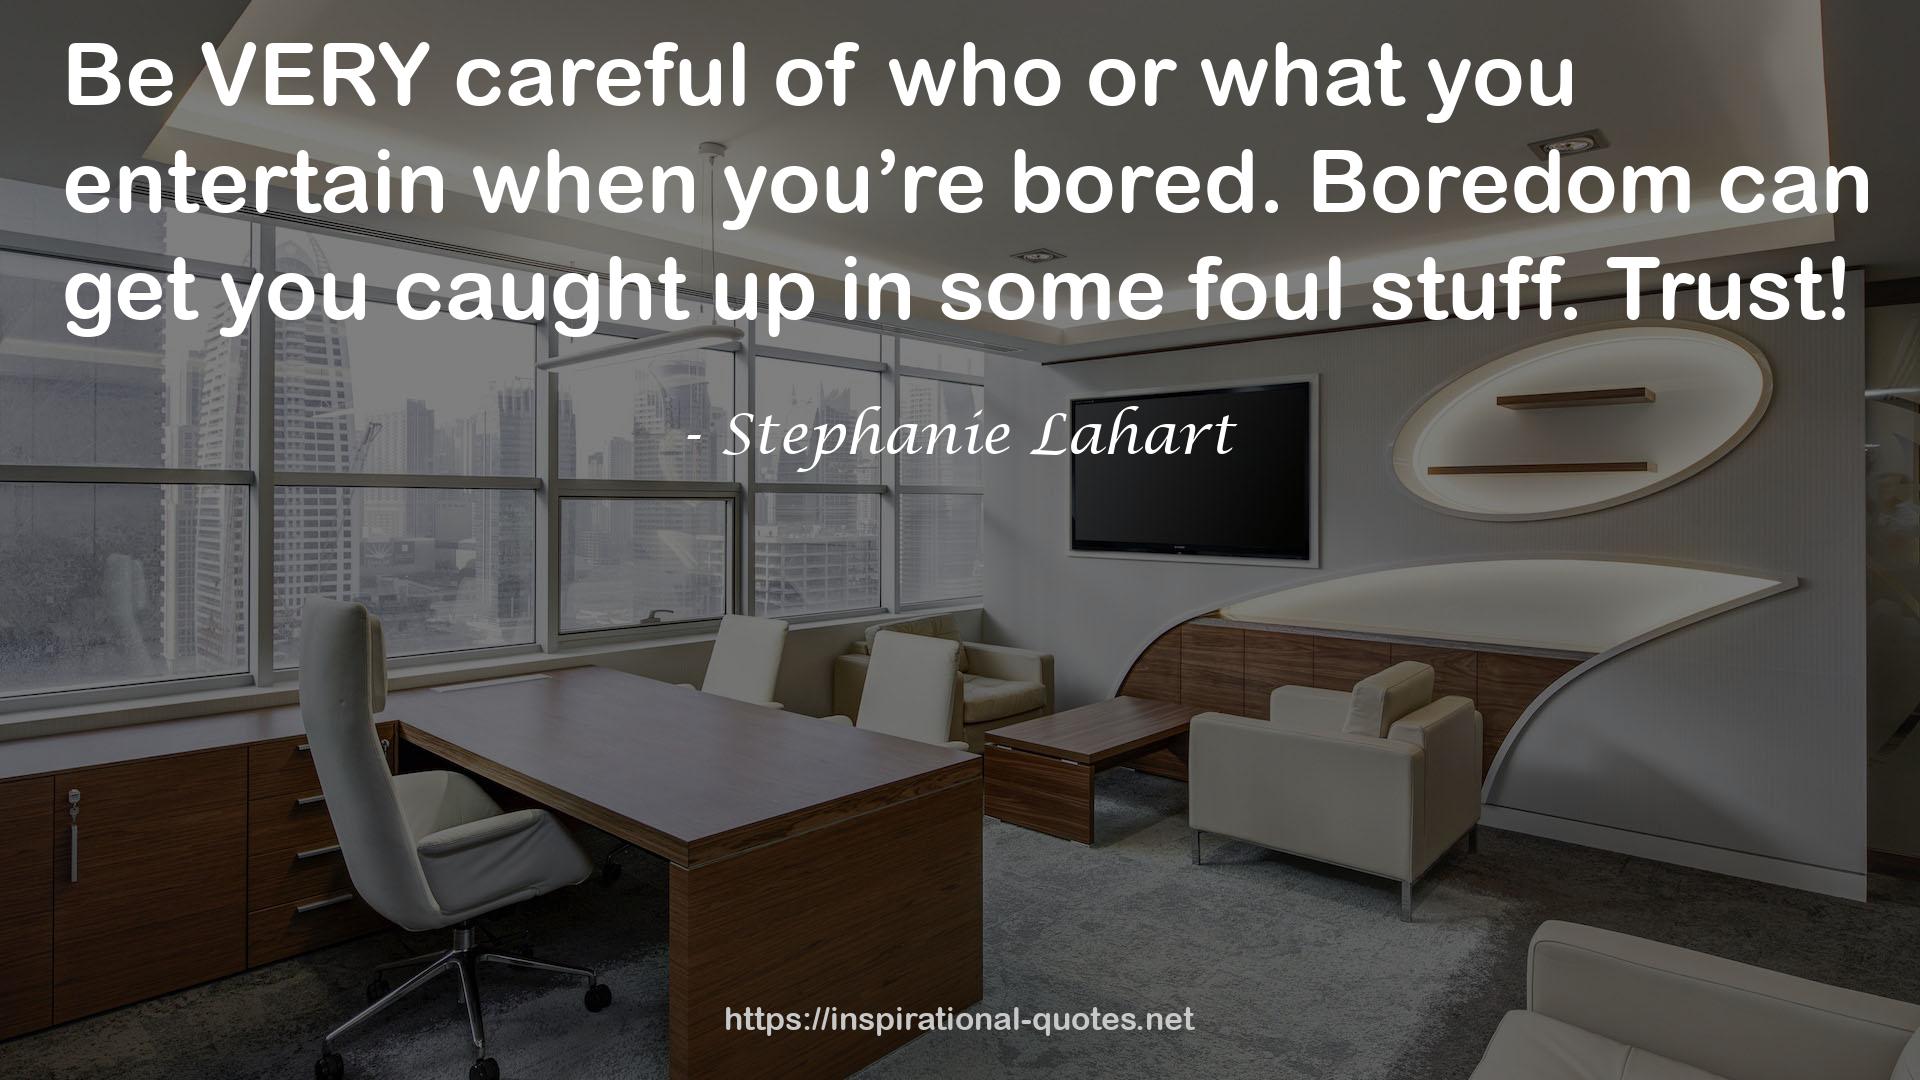 Stephanie Lahart quote : Be VERY careful of who or what you entertain when you’re bored. Boredom can get you caught up in some foul stuff. Trust!